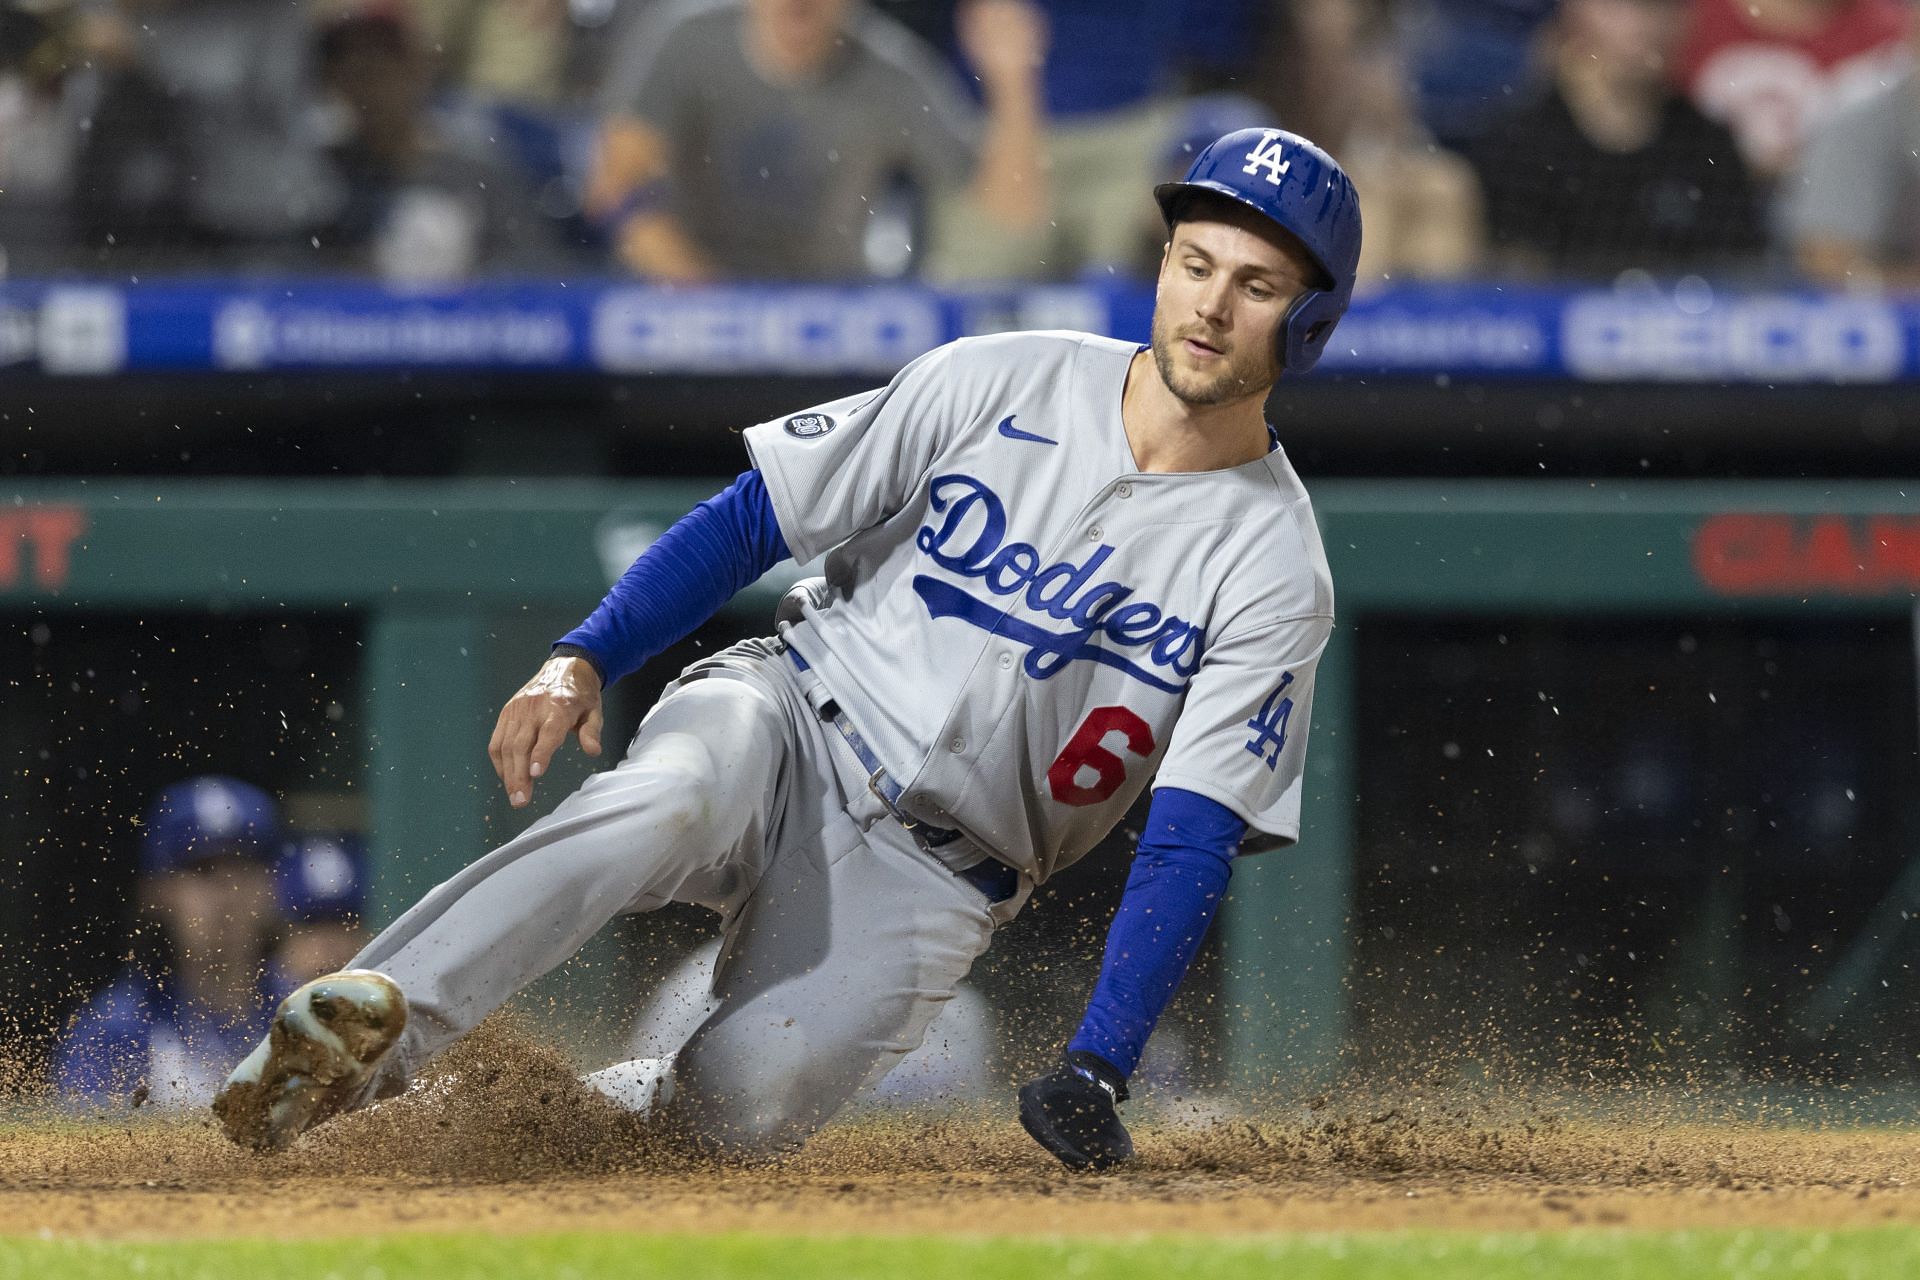 Trea Turner #6 of the Los Angeles Dodgers slides home safely in the top of the sixth inning against the Philadelphia Phillies at Citizens Bank Park on August 10, 2021, in Philadelphia, Pennsylvania. (Photo by Mitchell Leff/Getty Images)